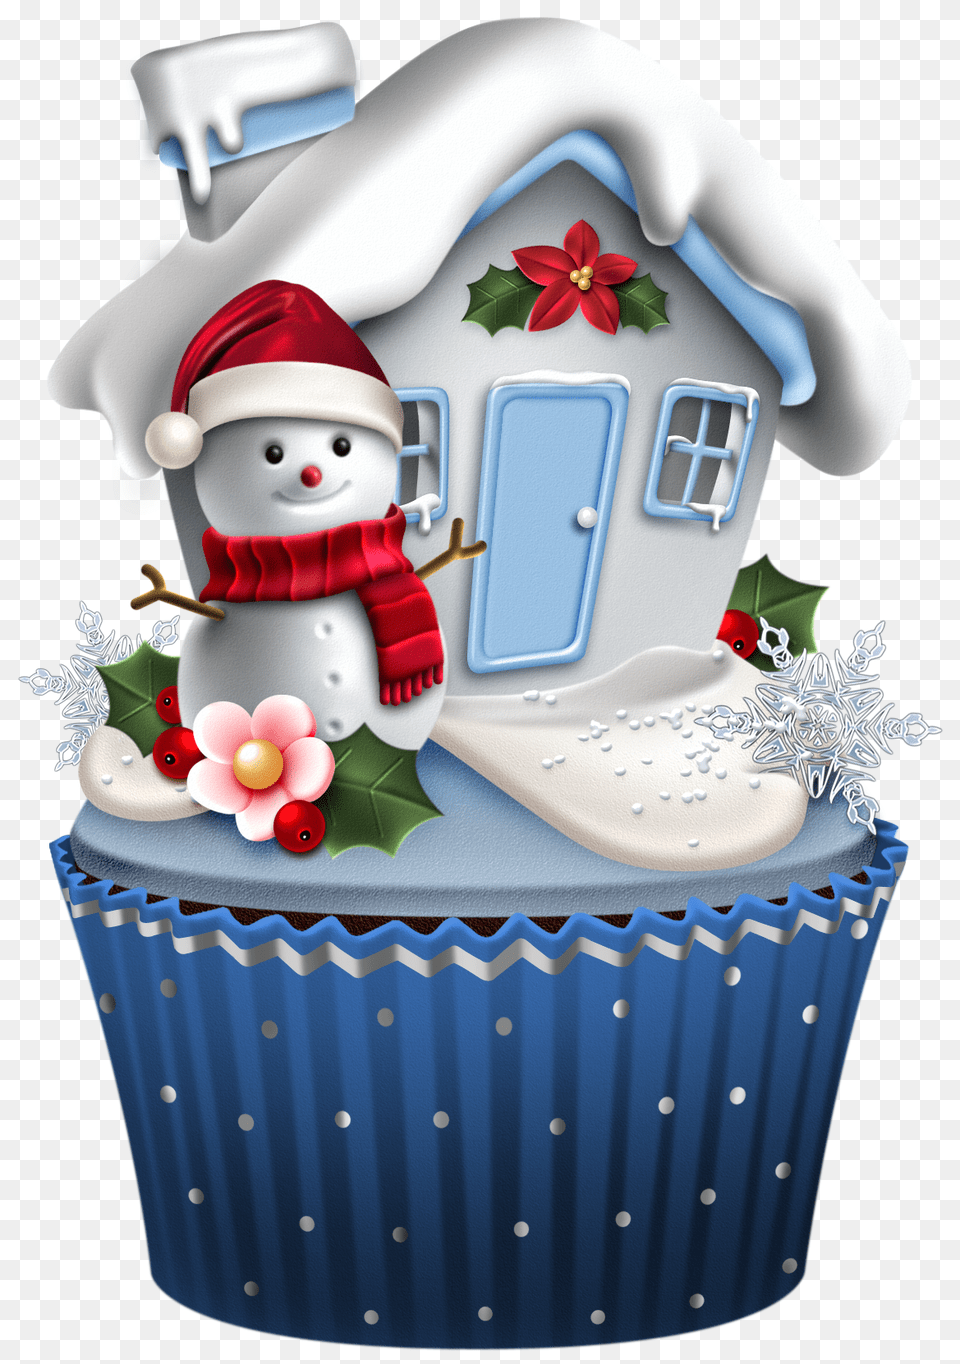 Lil Christmas, Outdoors, Nature, Winter, Food Png Image